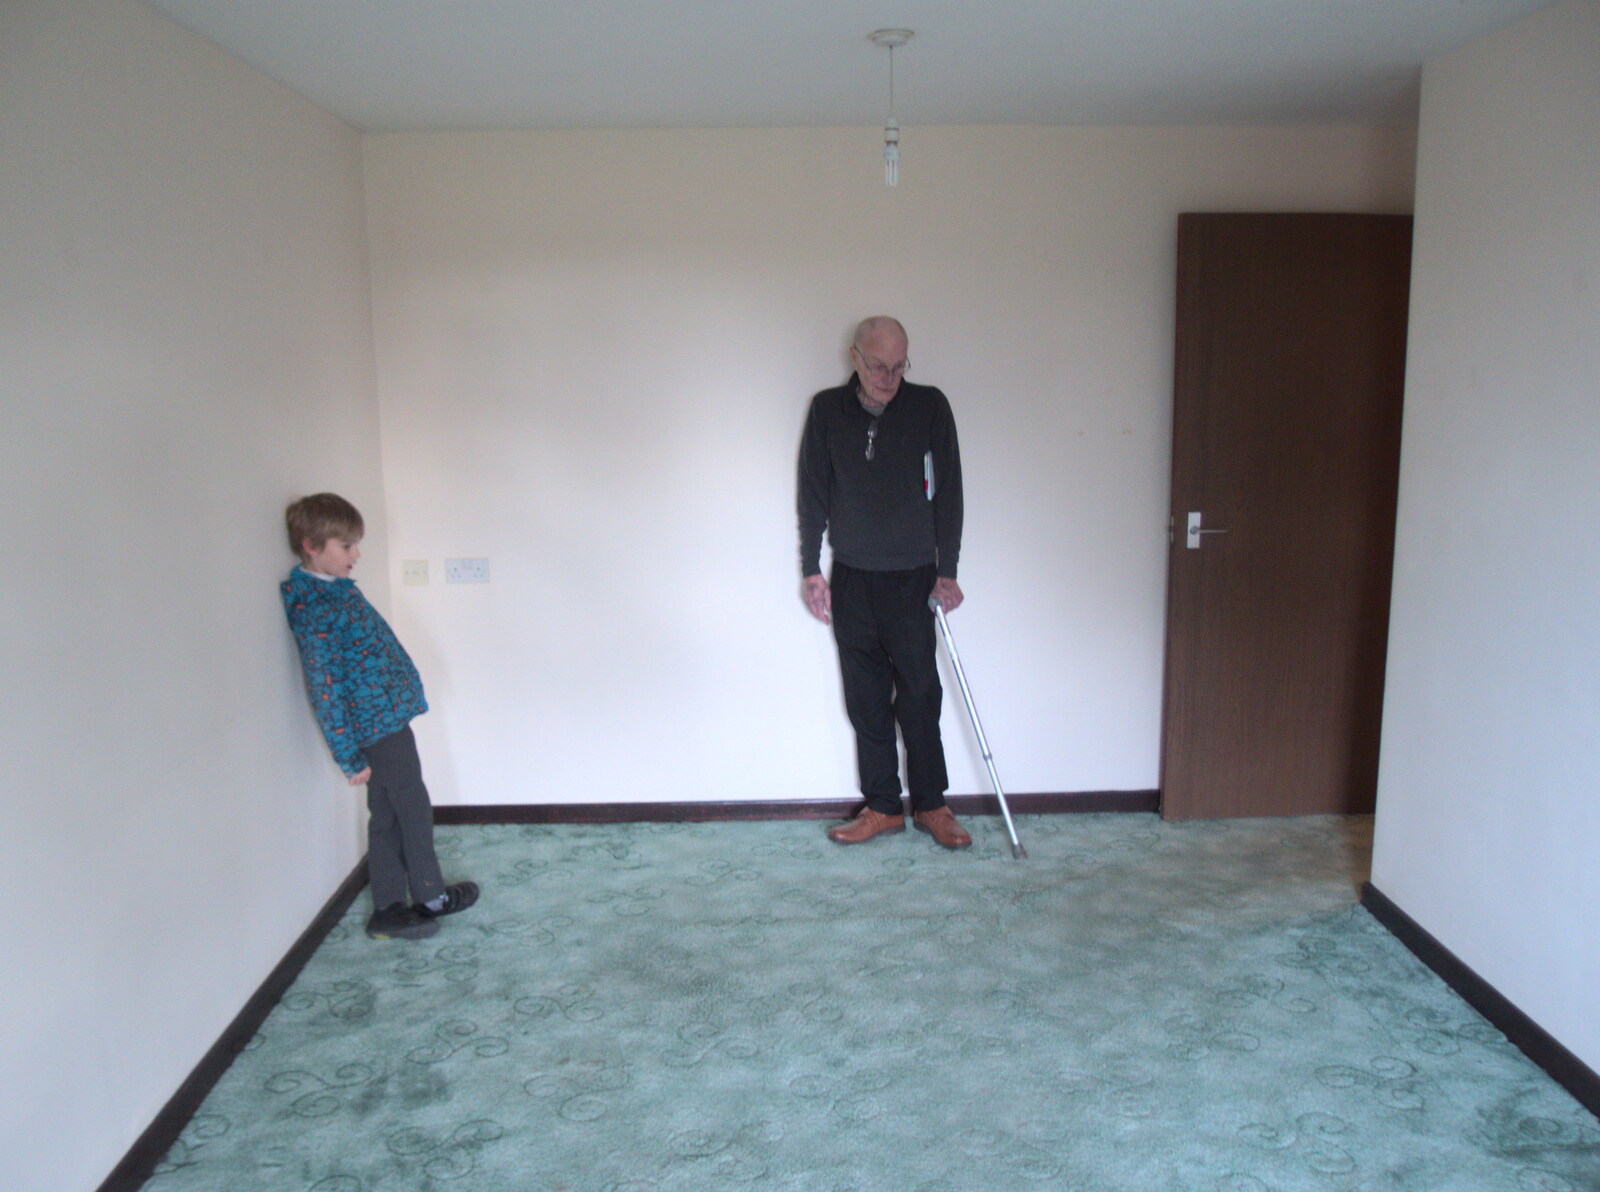 Harry and Grandad from The G-Unit Moves In, Eye, Suffolk - 4th March 2019